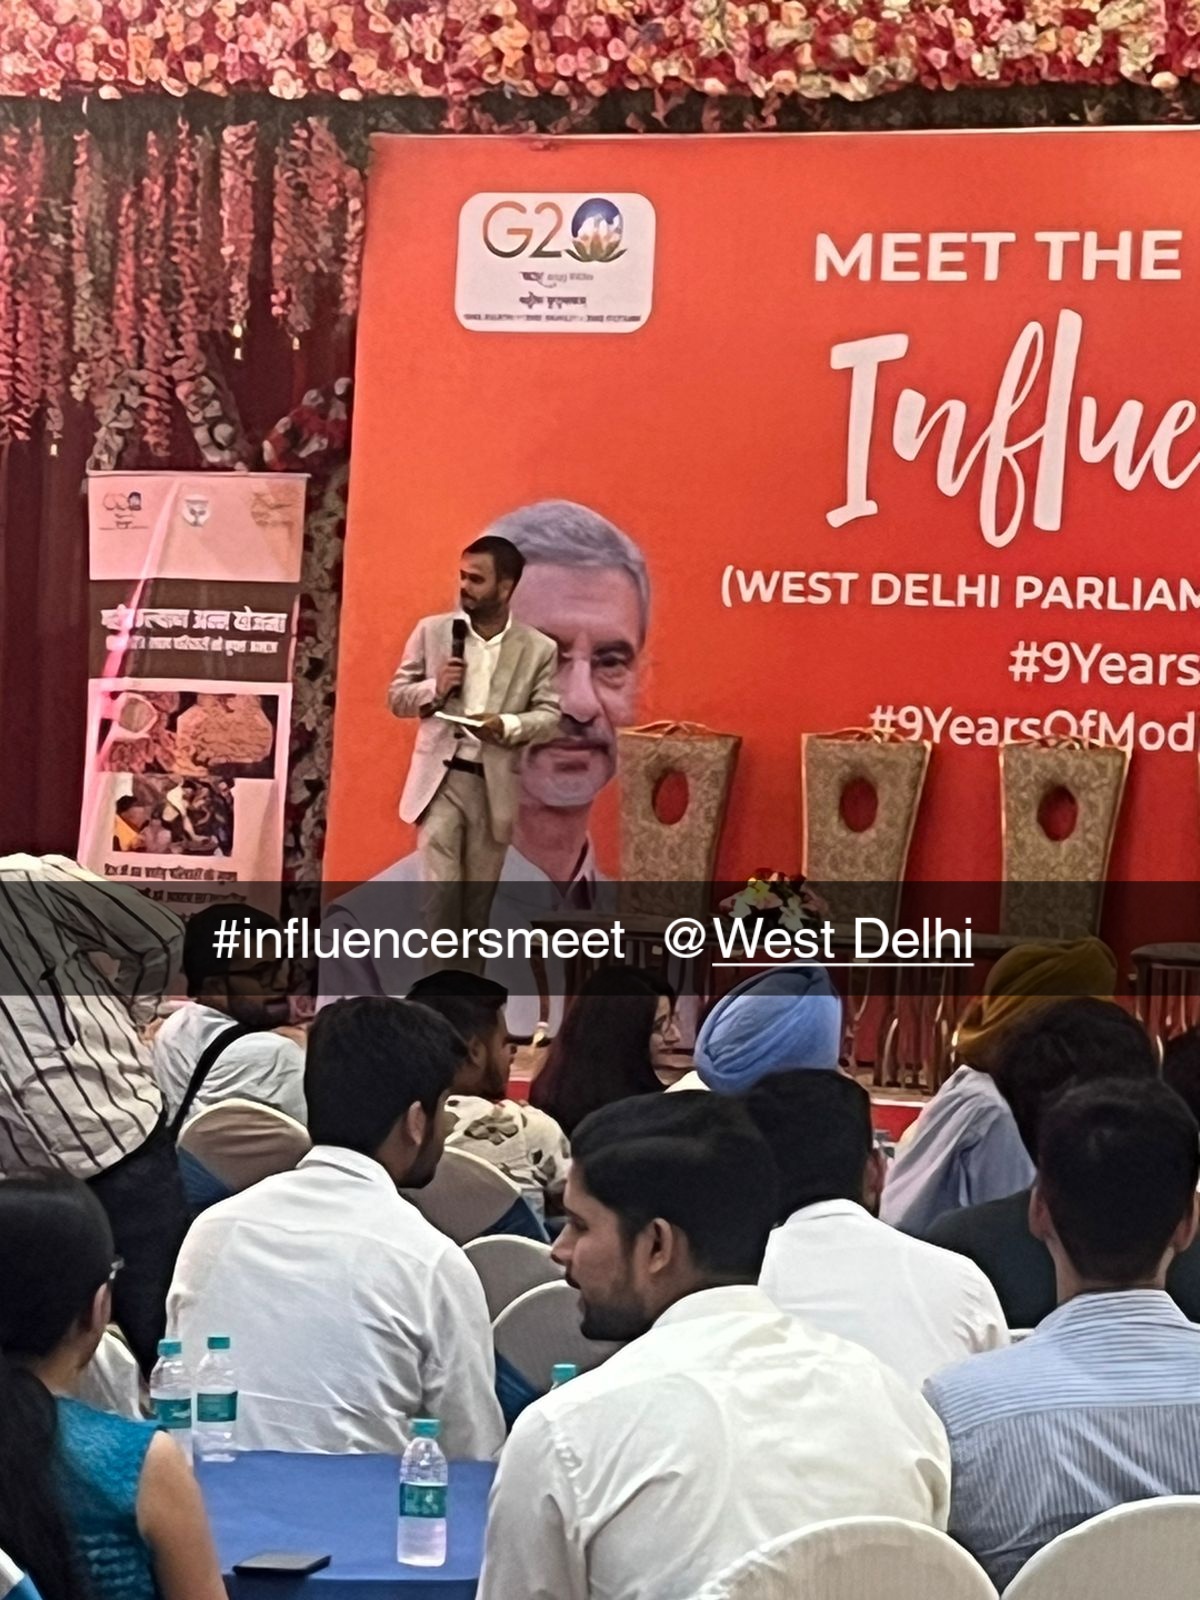 Vipin Khutail, as the Social Media Head of BJP West Delhi District, assumed the role of host and addressed the gathering of influencers.